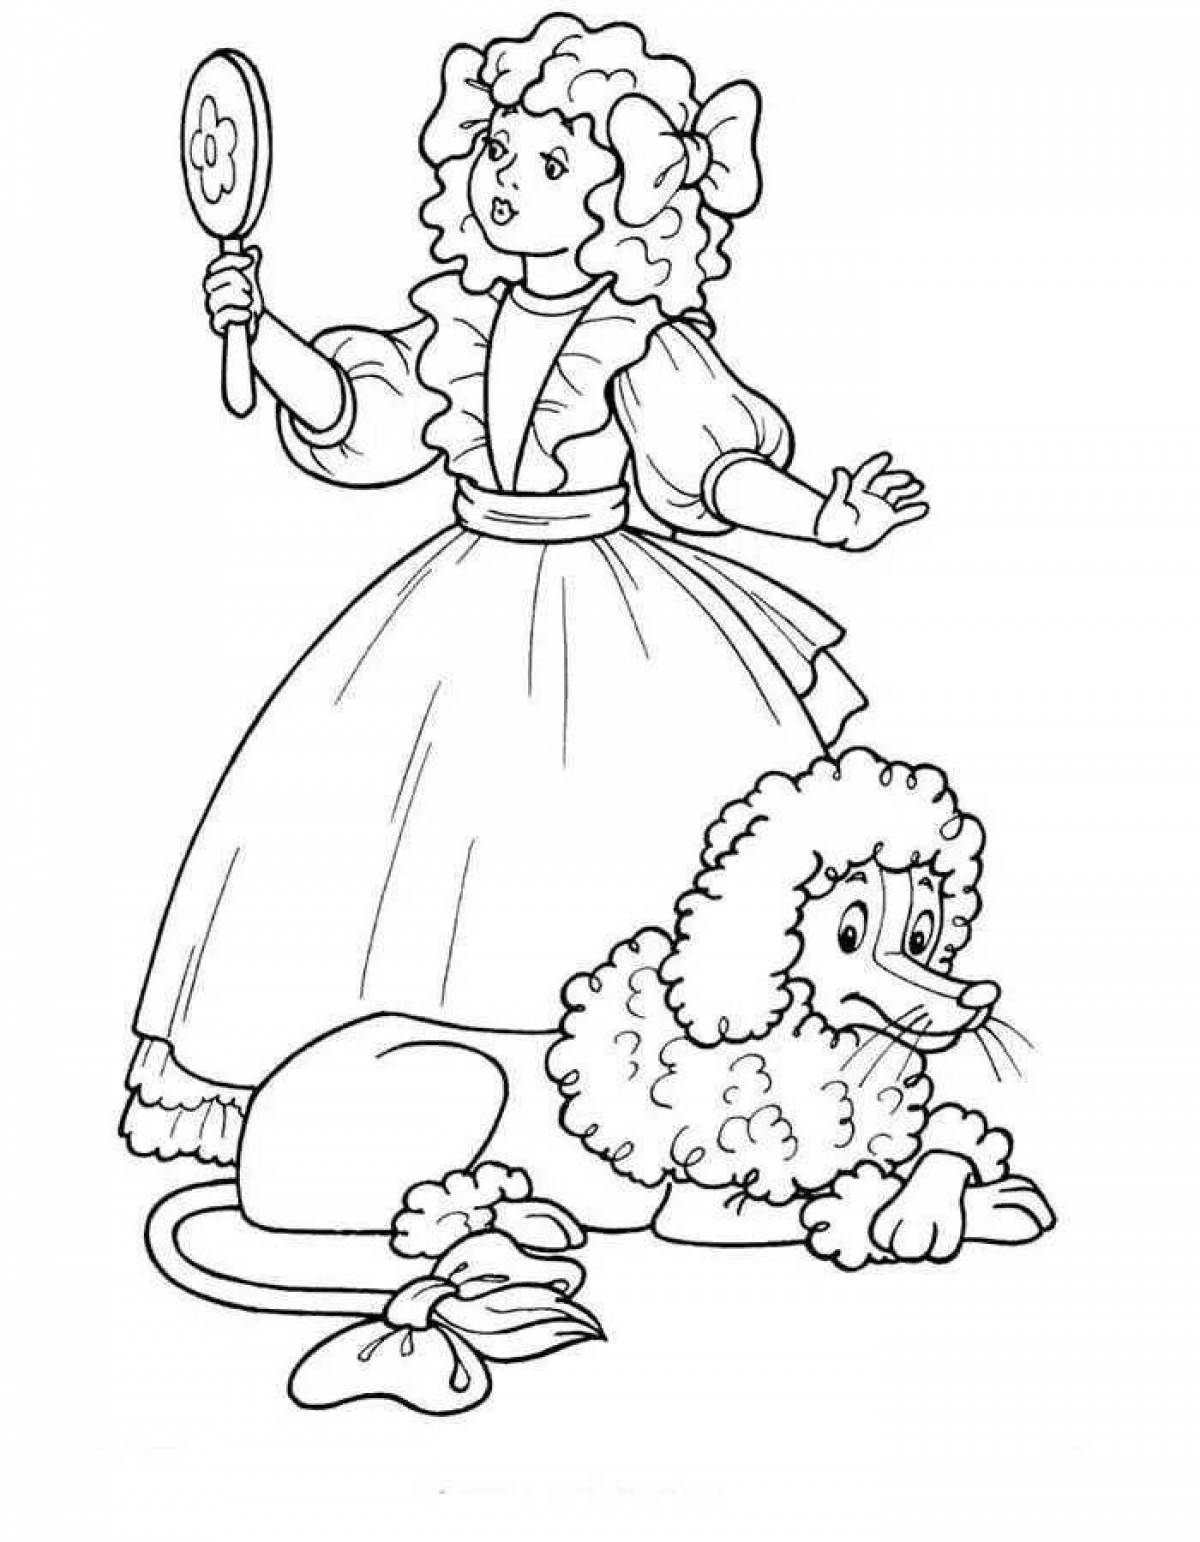 Glowing pinocchio and malvina coloring page